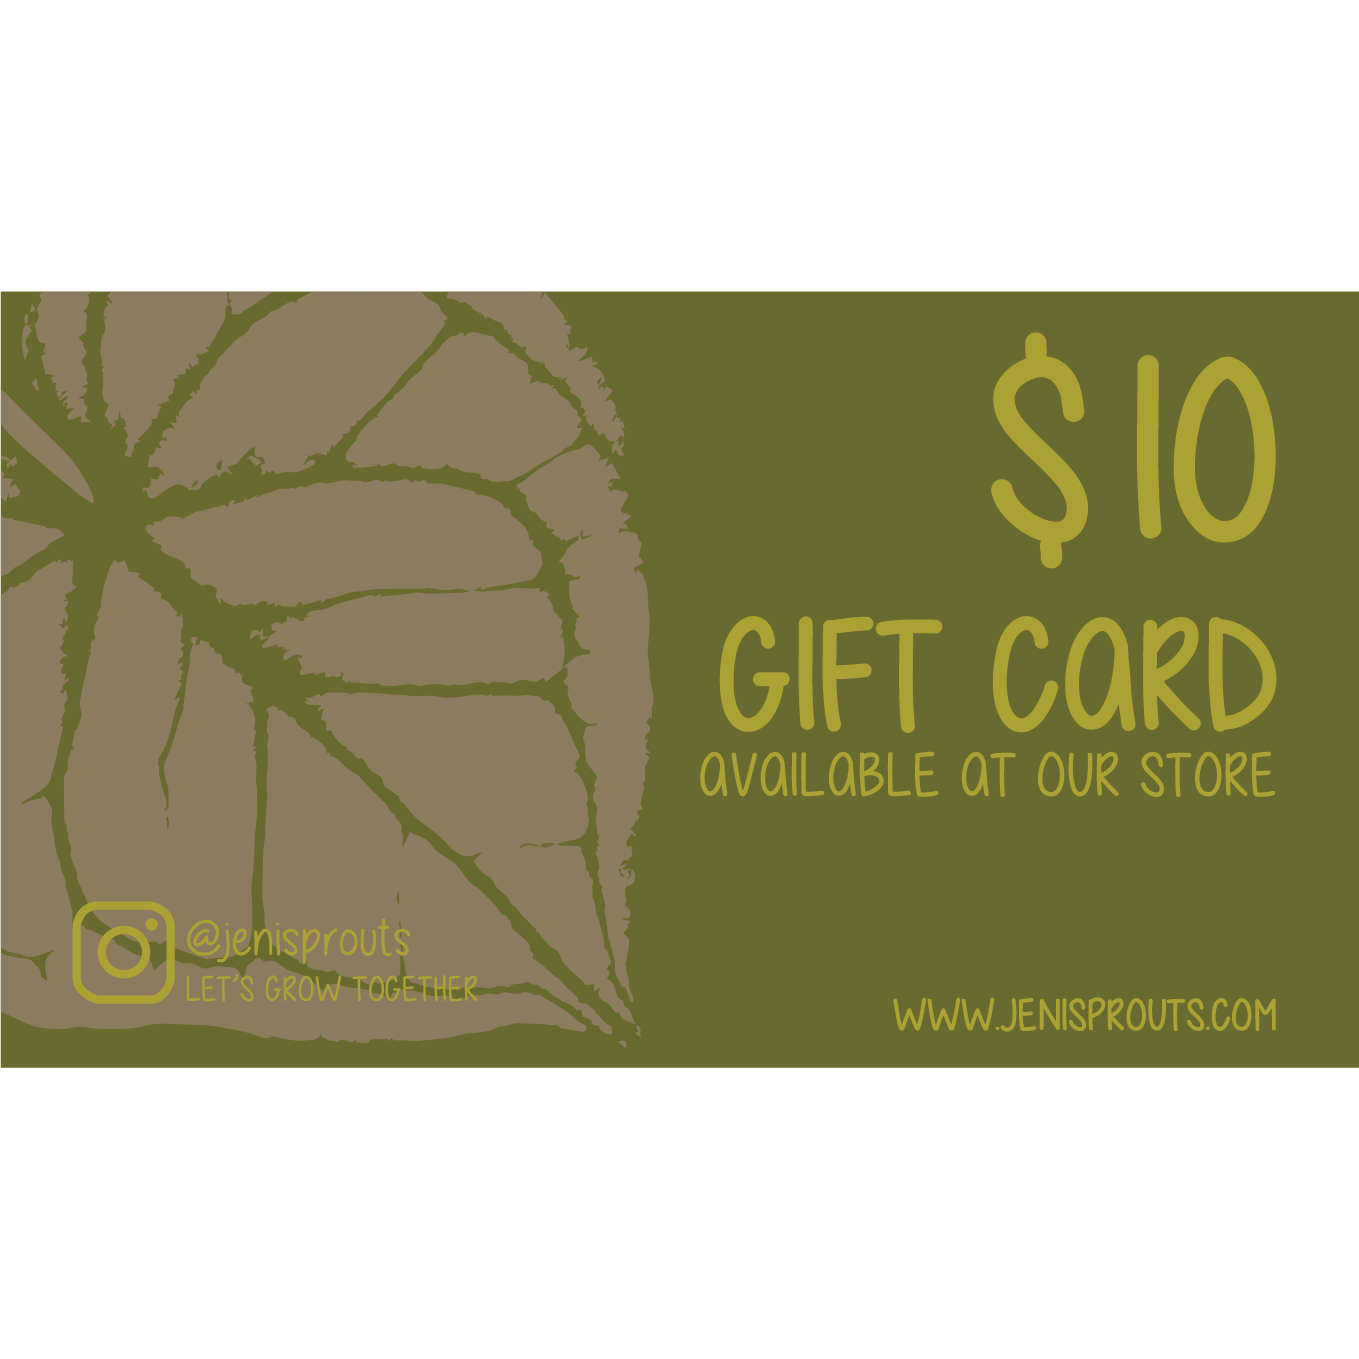 Jenisprouts' Gift Cards